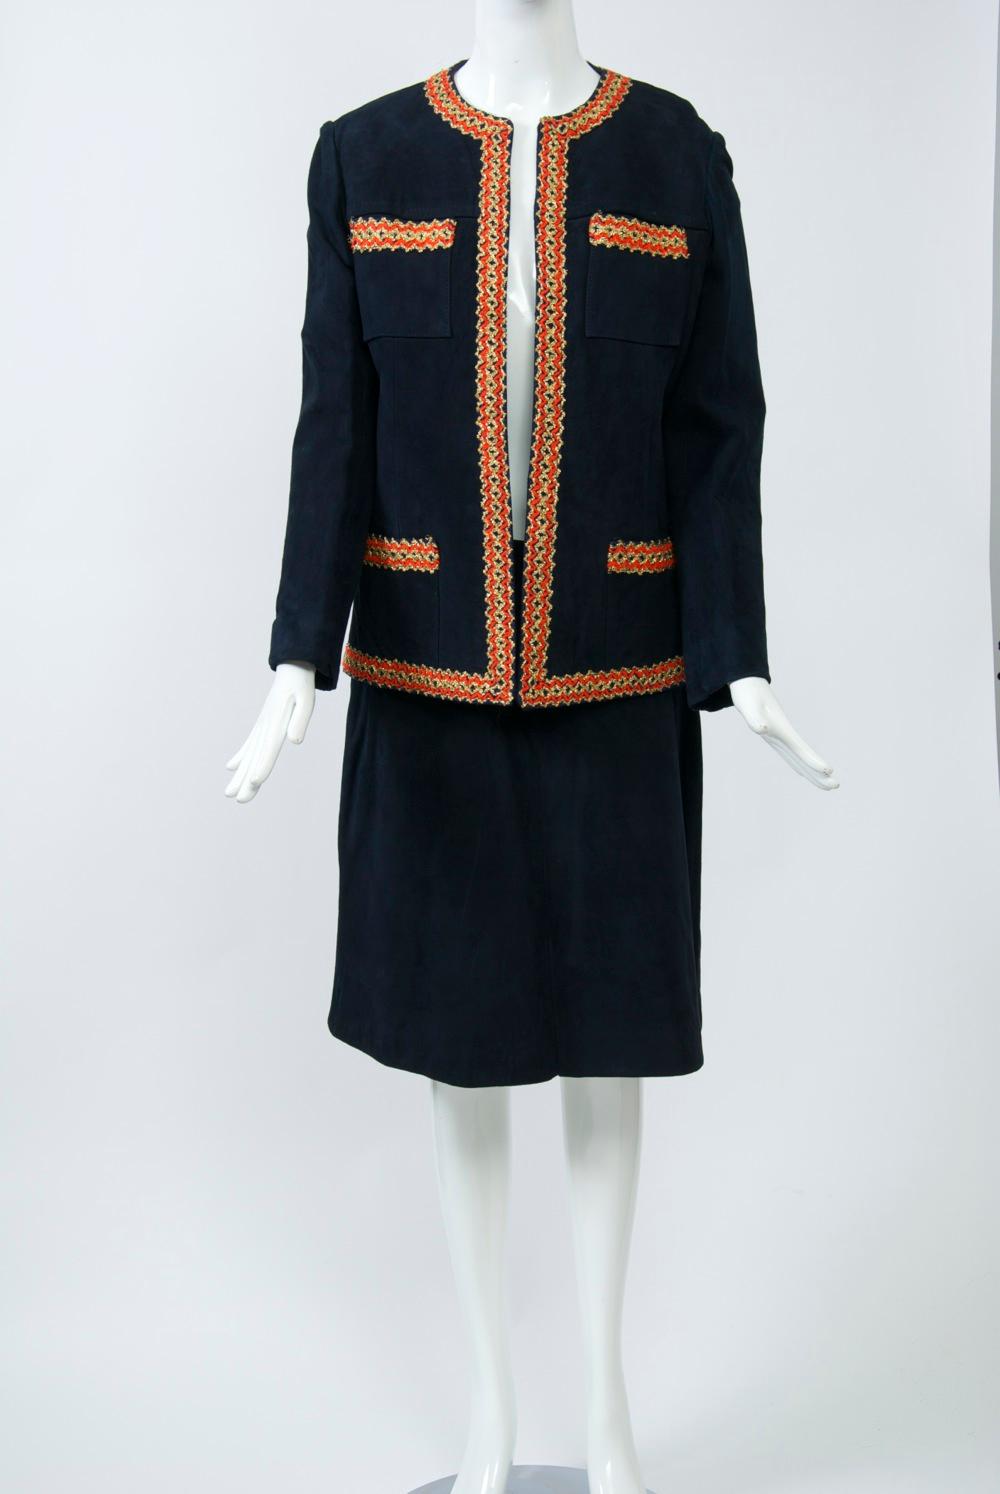 1960s navy suede suit in the style of a classic Chanel, it features a red and gold zigzag braid around the edges of the jacket and the top of the bodice pockets. The slim skirt rests on the waistline and has a slight A shape and back zipper. Jacket